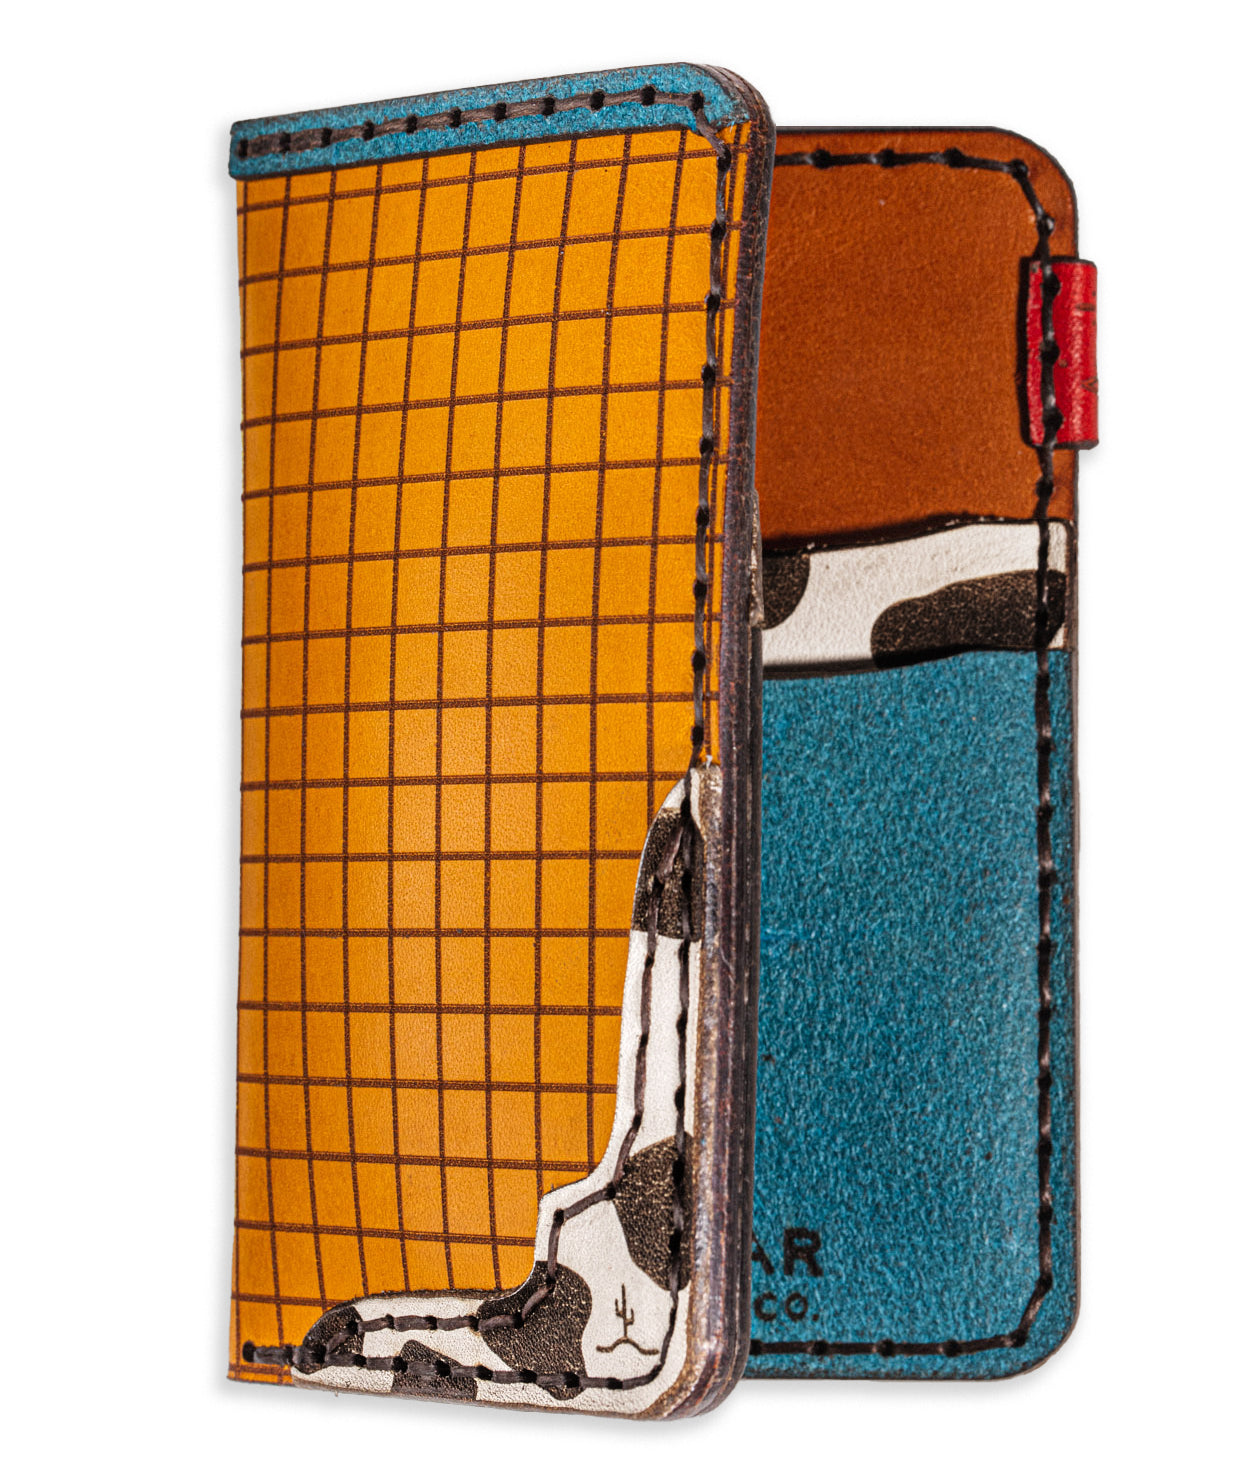 multicolor four pocket vertical wallet with red, blue, yellow, and cowprint leather